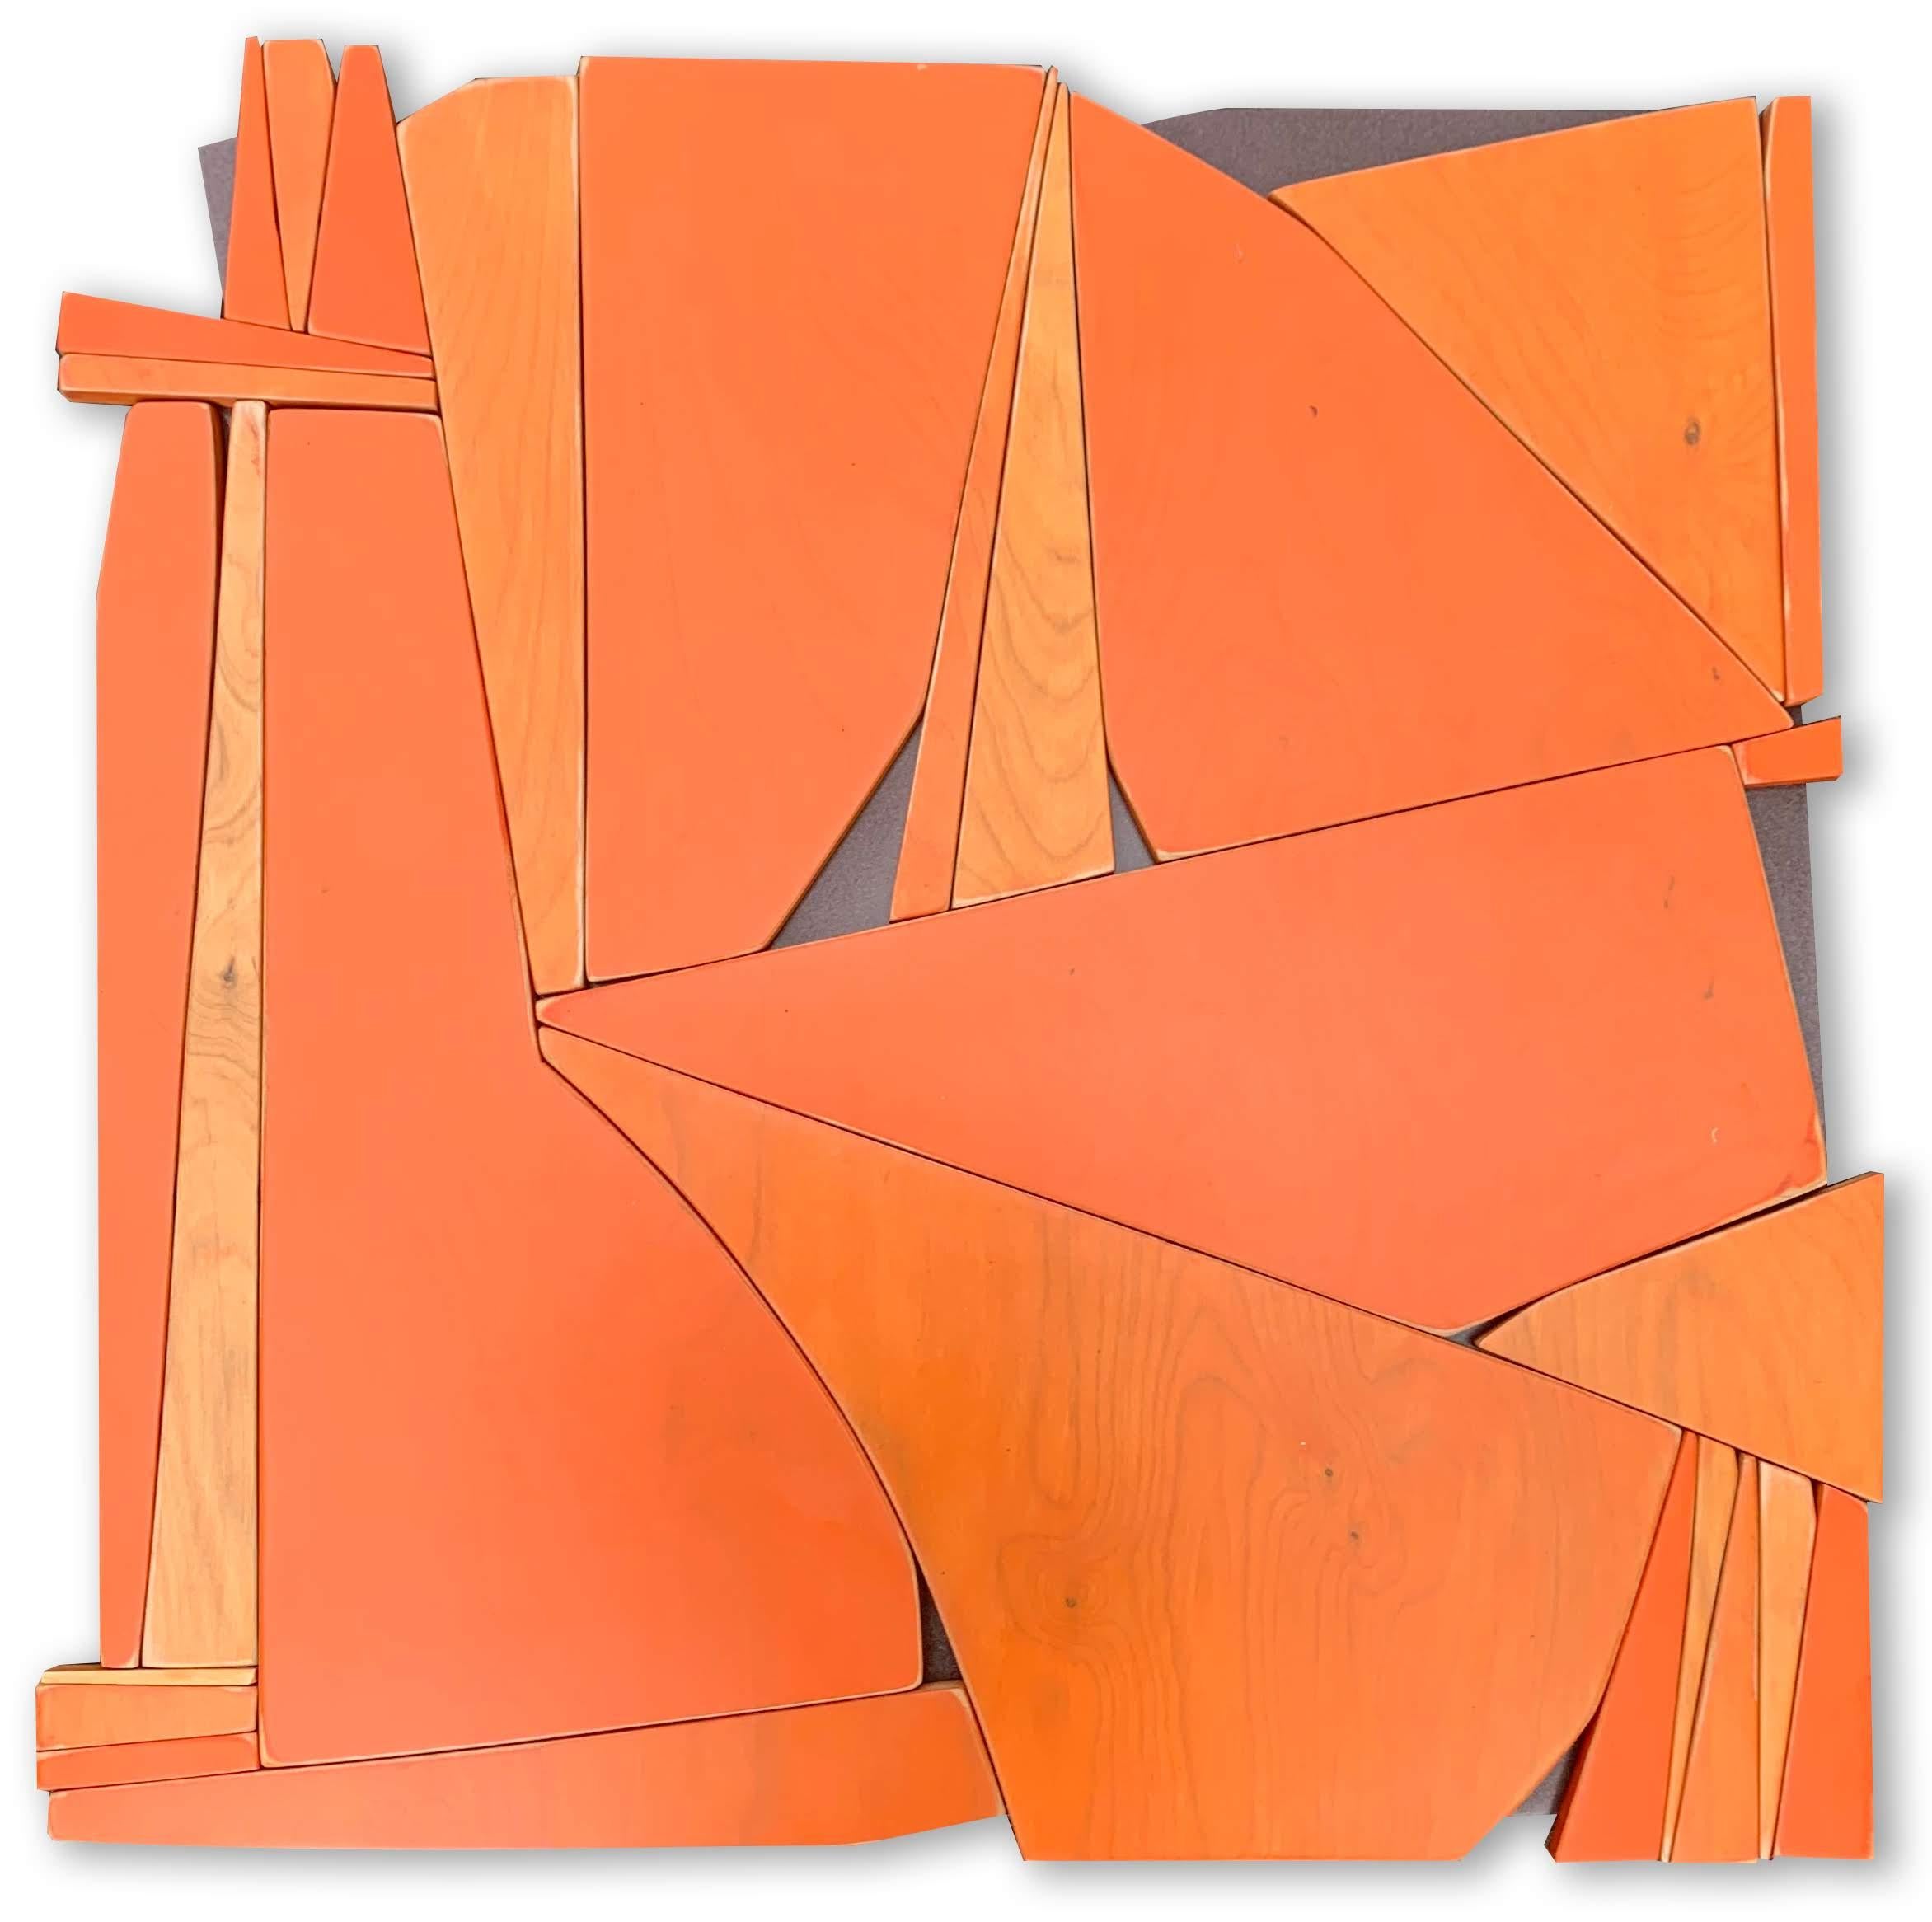 Scott Troxel
Tiki IV, 2019
Acrylic washes on birch, mounted on mdf painted with metallic enamel. Satin Lacquer clear coat.
24 x 24 x 2/3 in.
(trox010)

This original abstract wooden wall sculpture by Scott Troxel has a mid-century modern sensibility